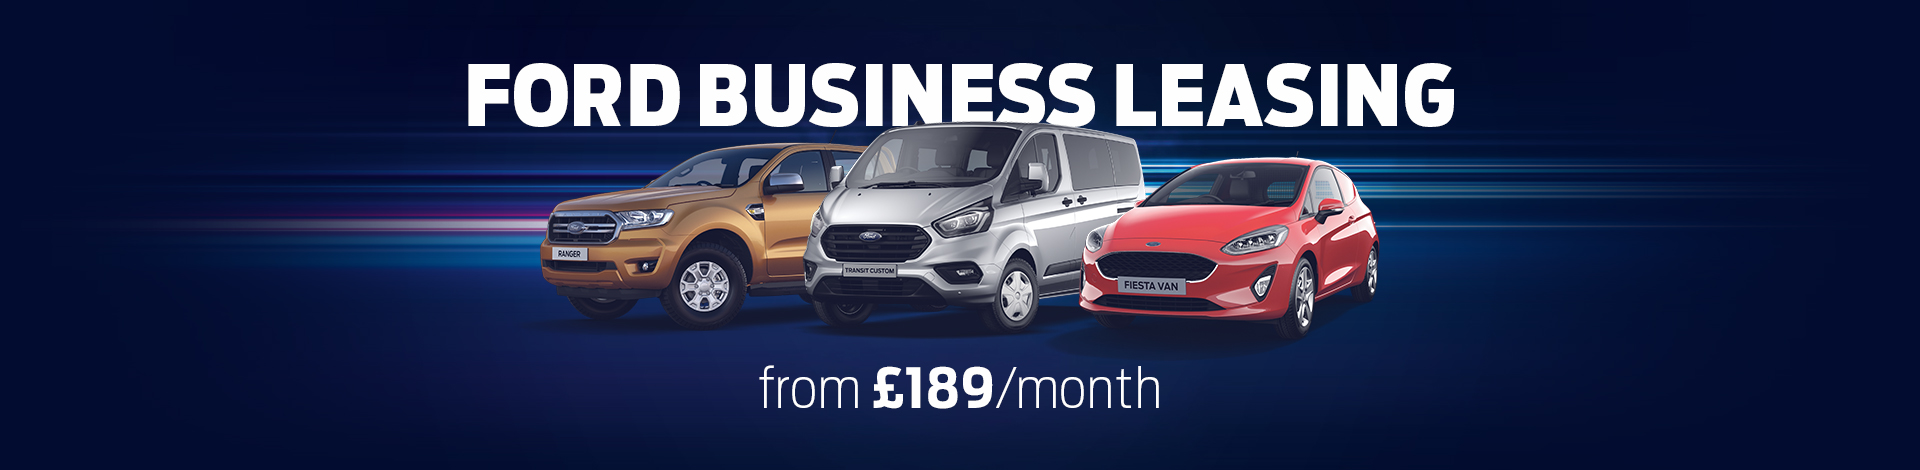 Ford Business Leasing